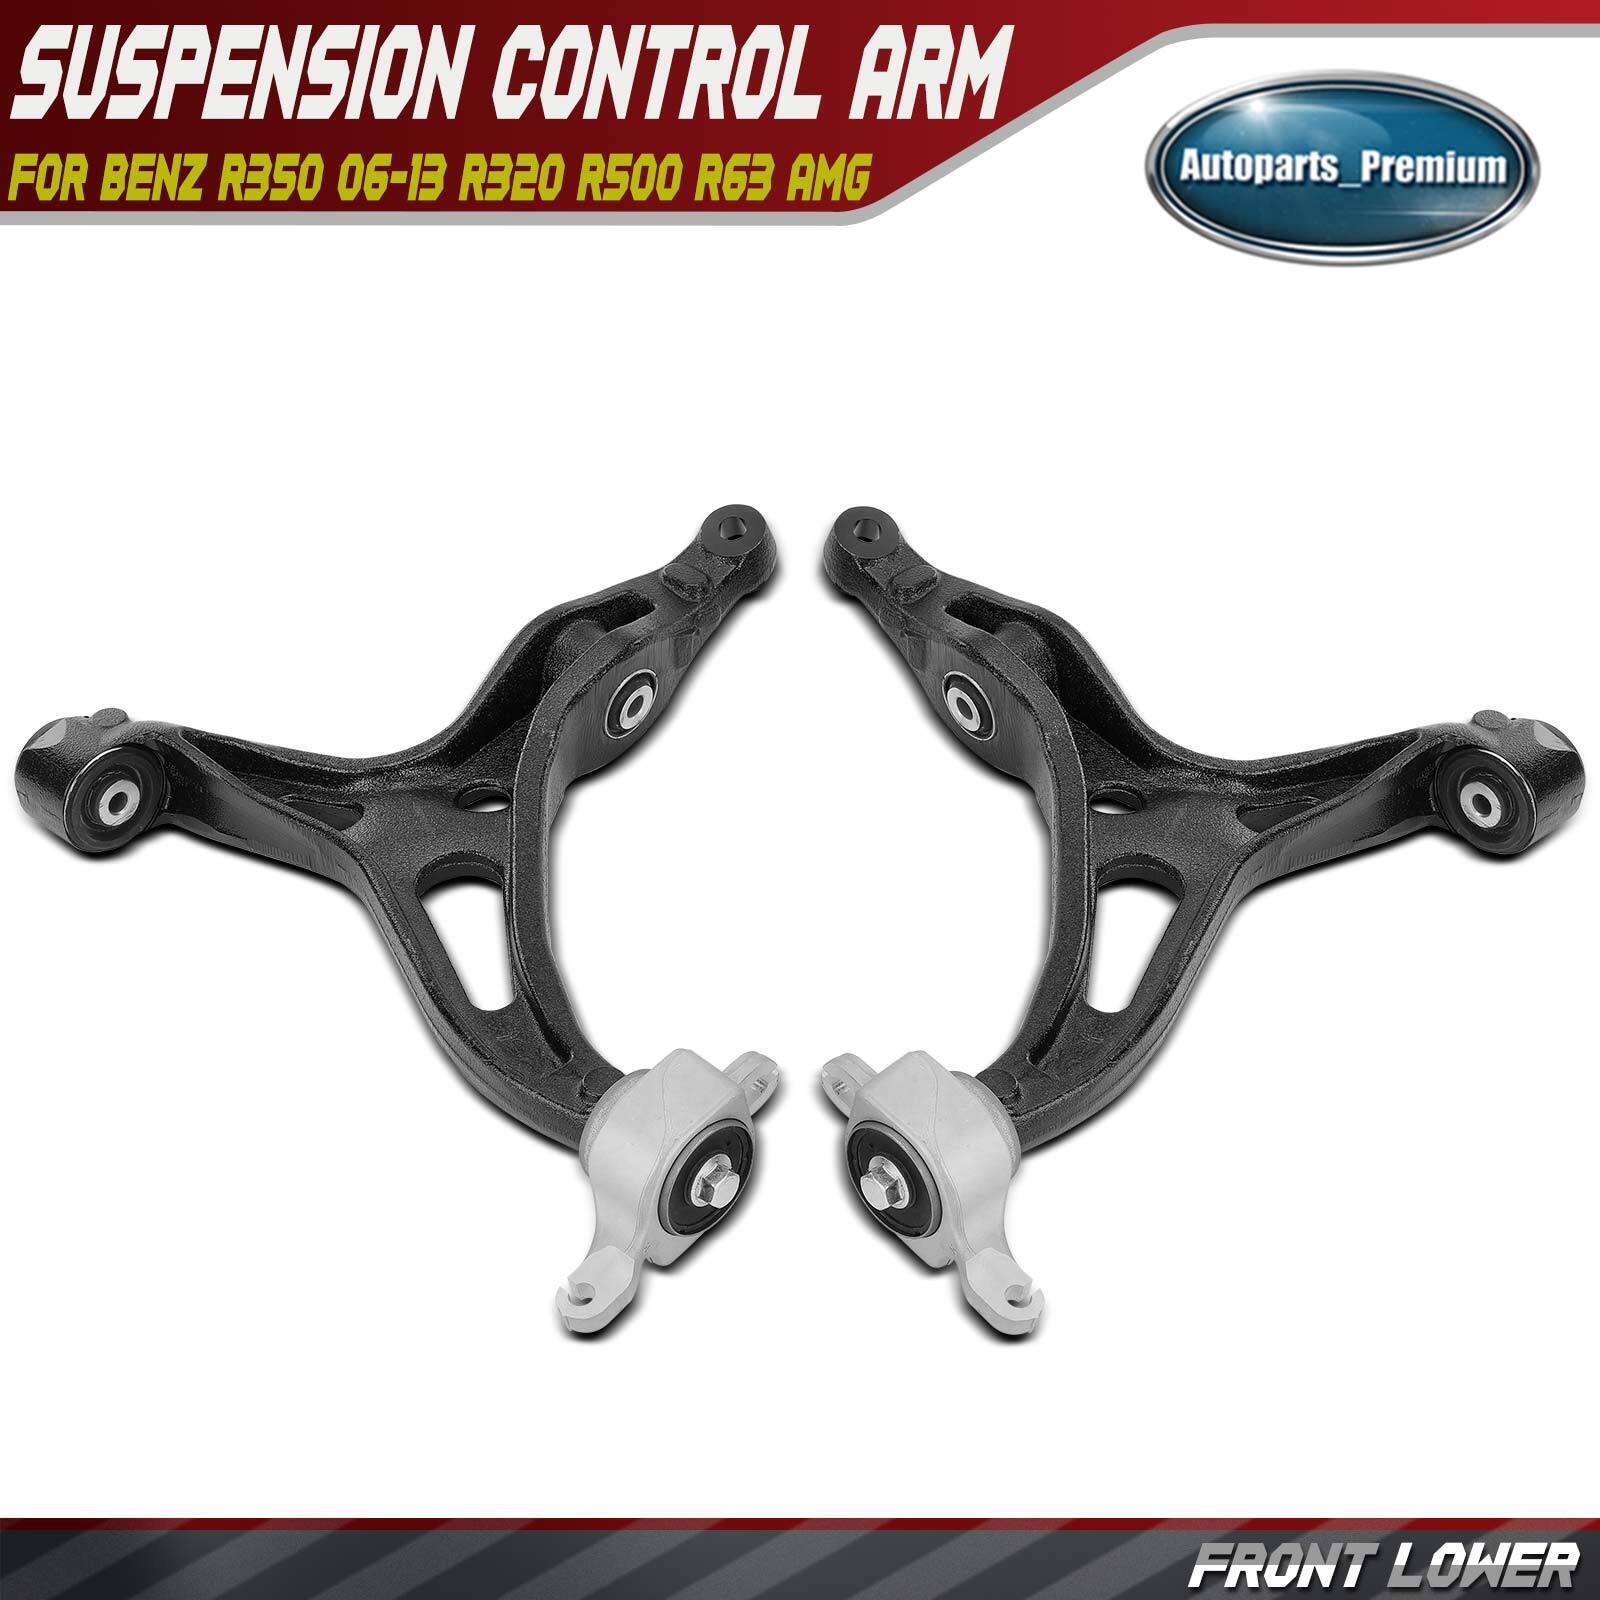 2Pcs Front Lower Control Arm for Mercedes-Benz W251 R350 06-13 R320 R500 R63 AMG